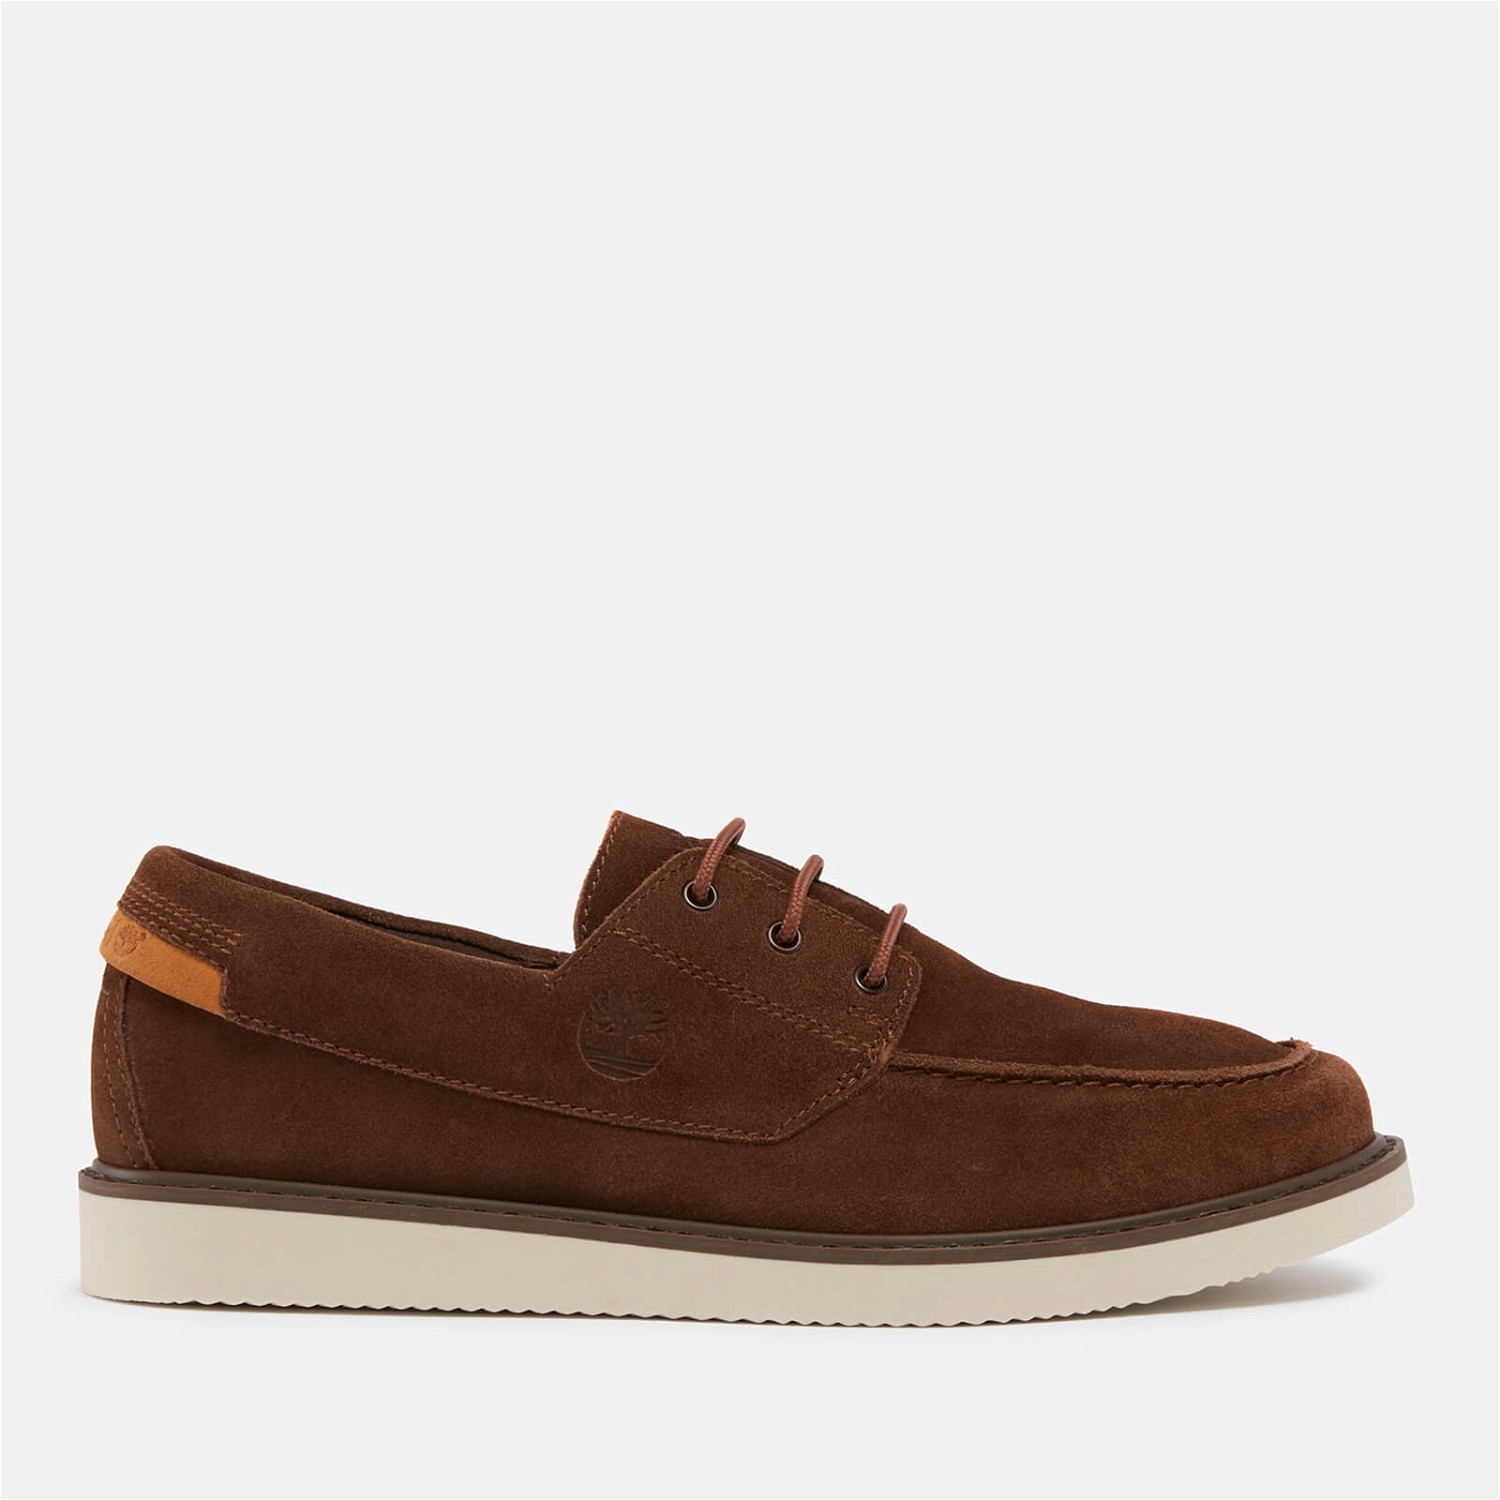 Ruházat Timberland Men's Newmarket II Suede Boat Shoes - UK 7 
Piros | TB0A5REM9681, 0